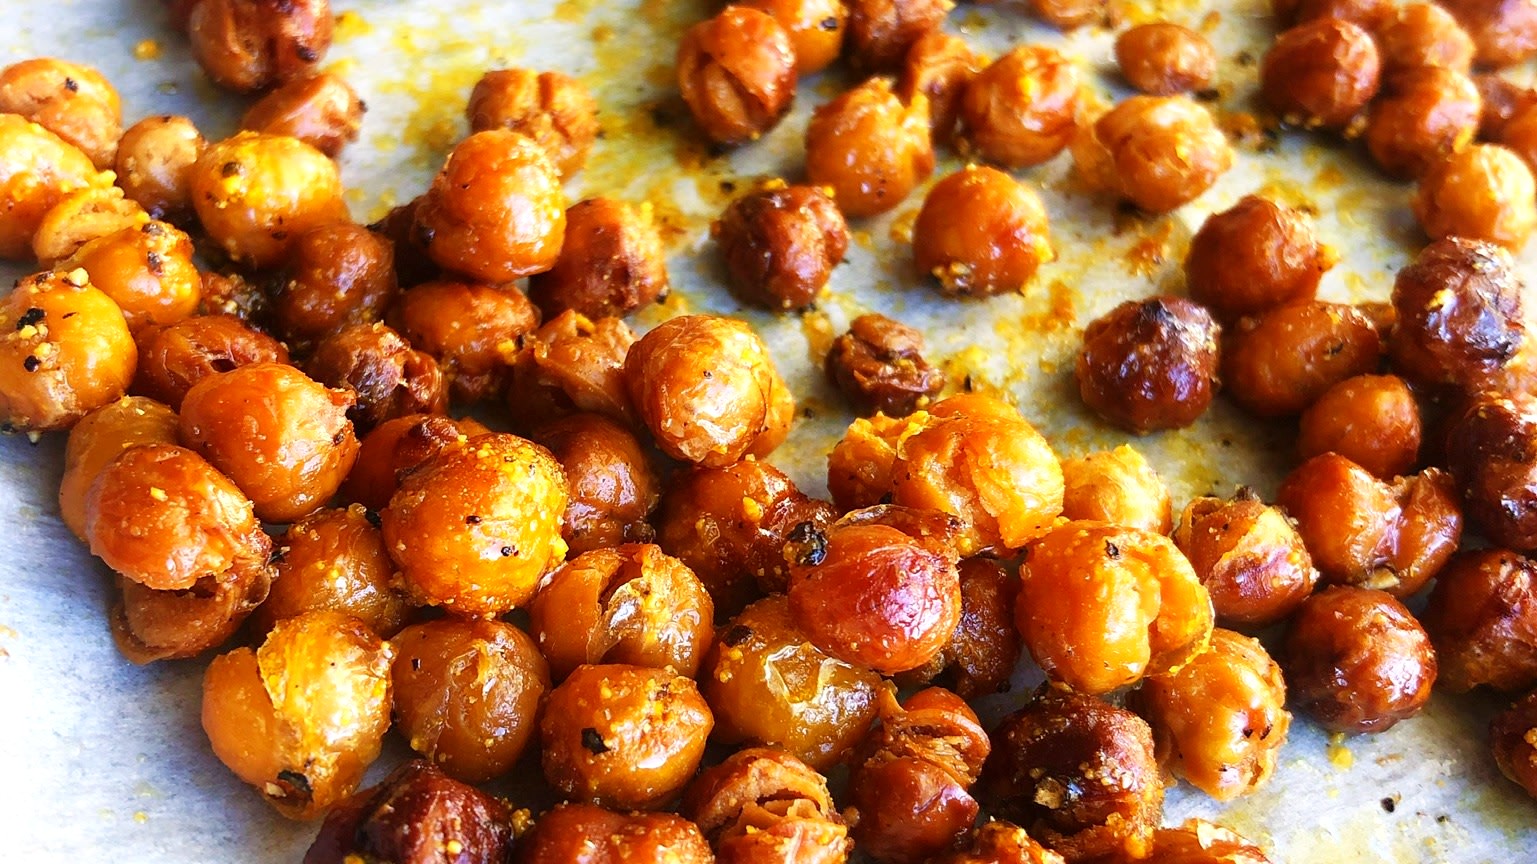 Image of BECAUSE SOMETIMES ALL YOU HAVE IS A CAN OF GARBANZO BEANS... (Part 2 - Crispy Chick Peas)